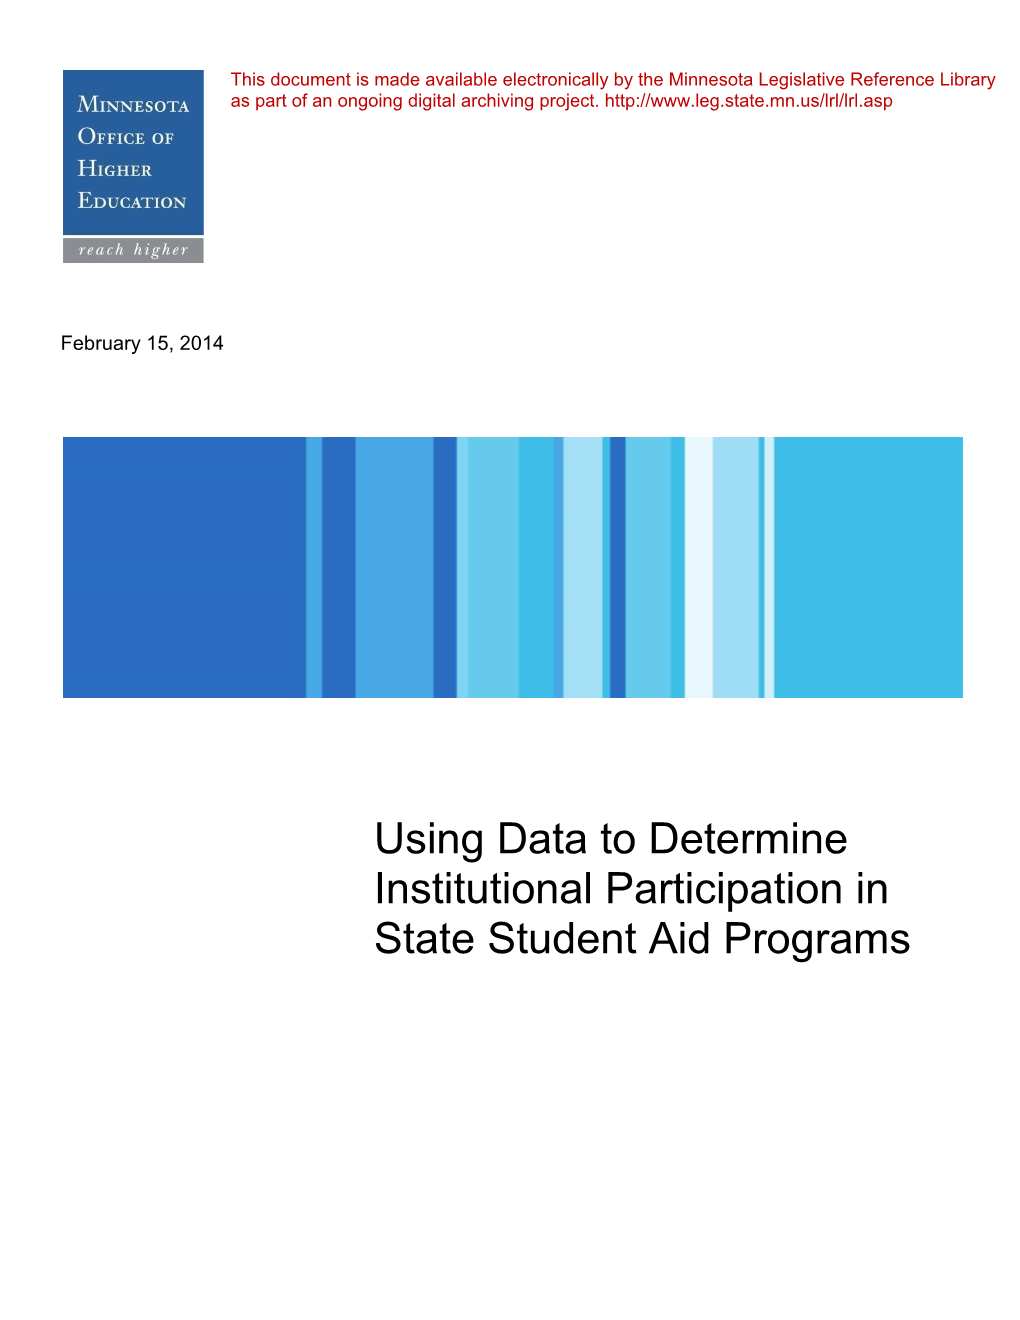 Using Data to Determine Institutional Participation in State Student Aid Programs